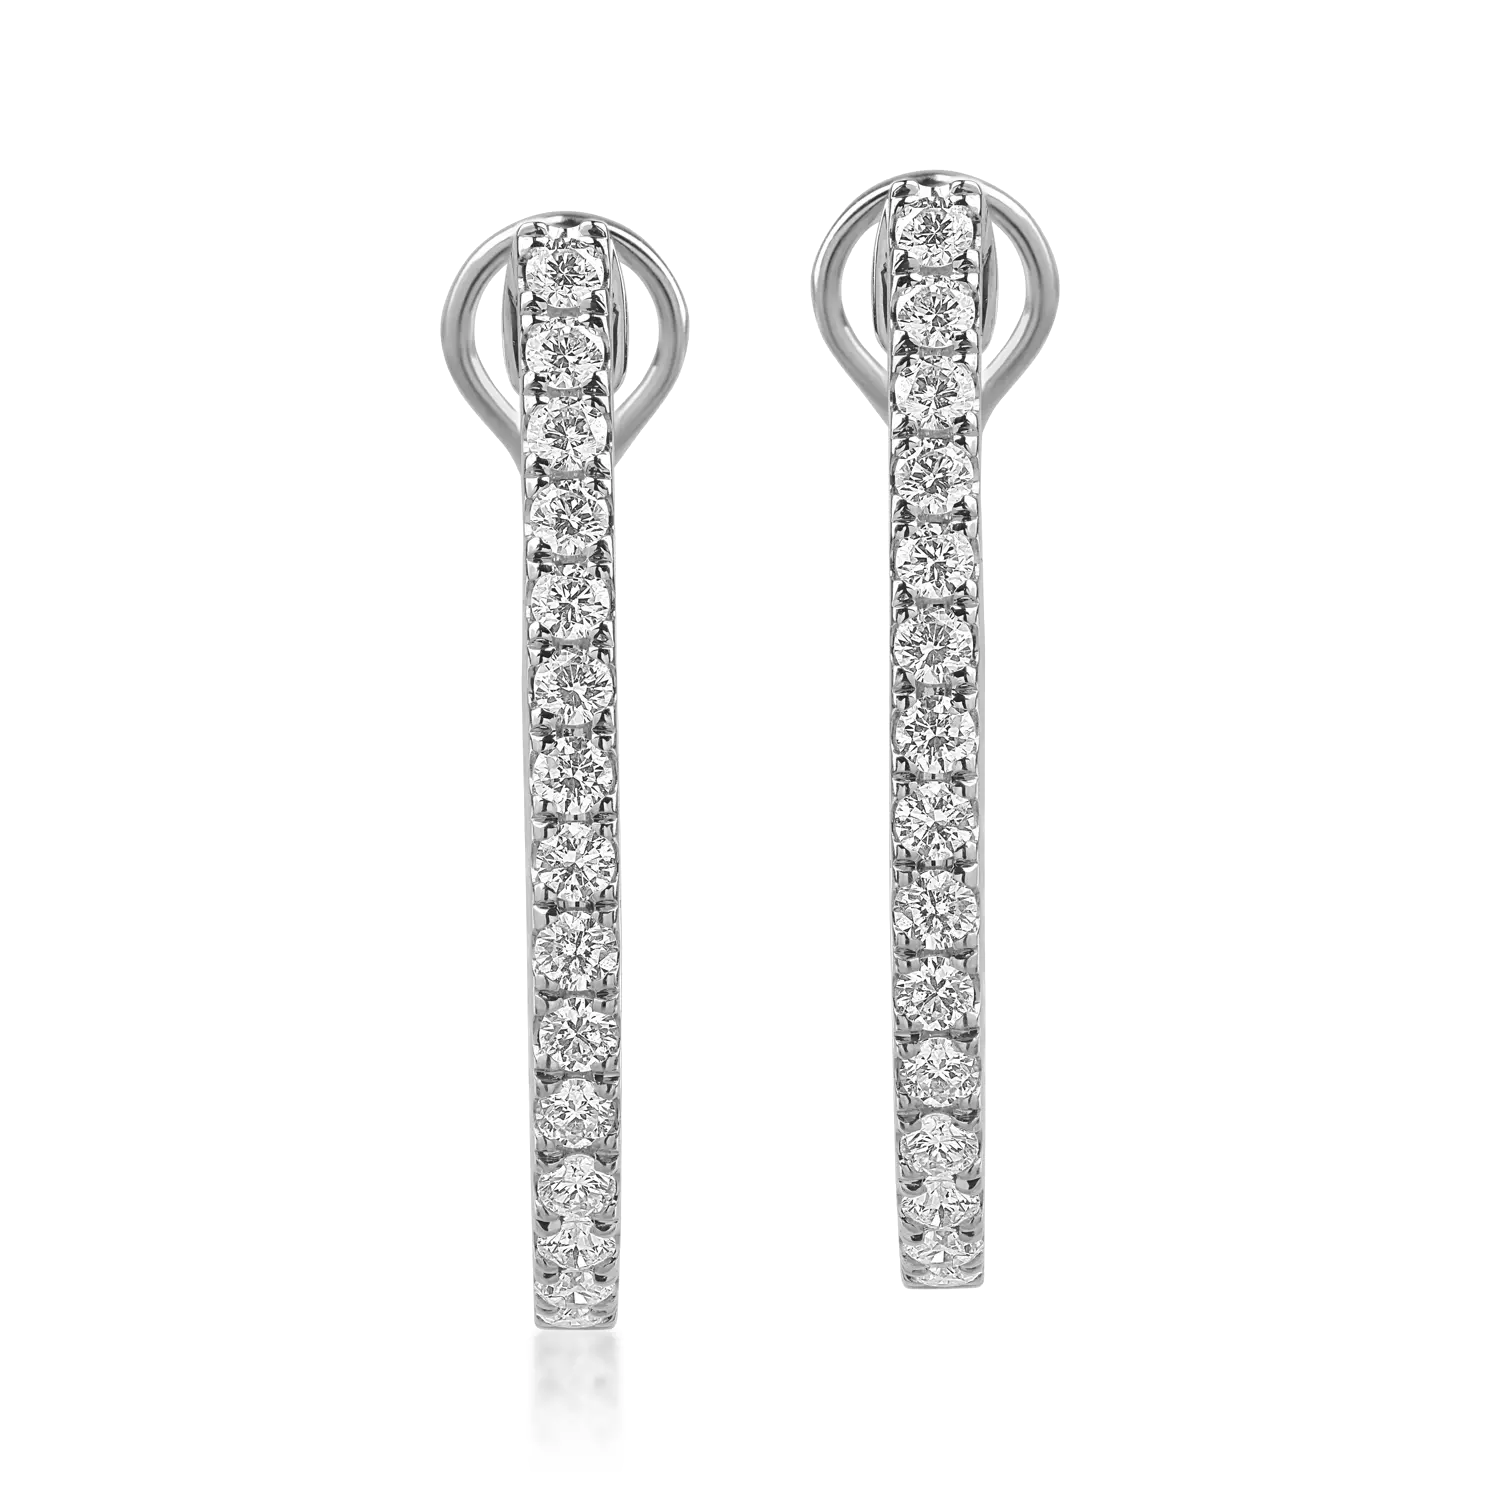 White gold earrings with 1.49ct diamonds